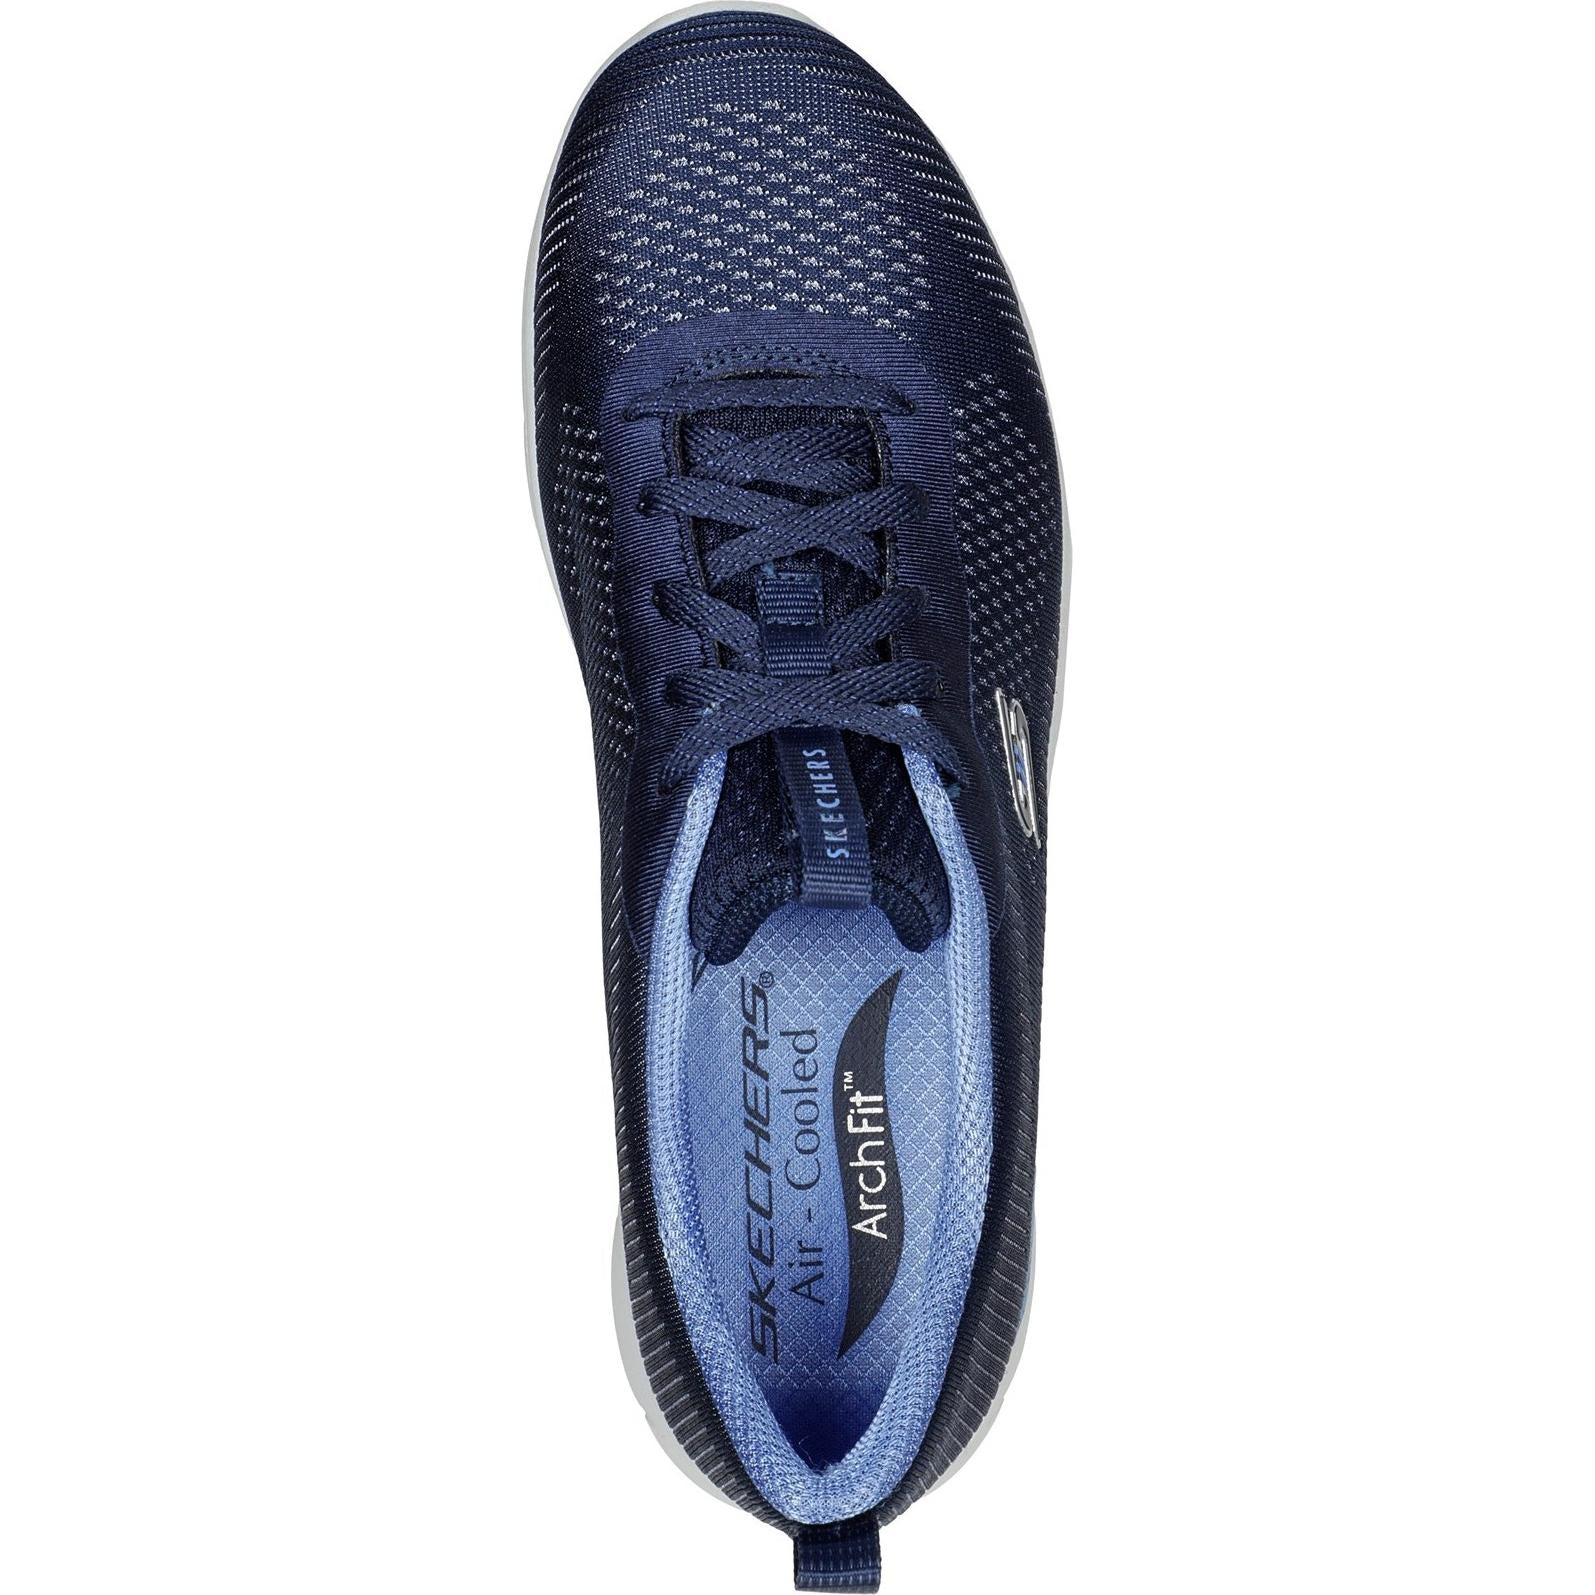 Skechers Arch Fit Refine Classy Doll Trainers